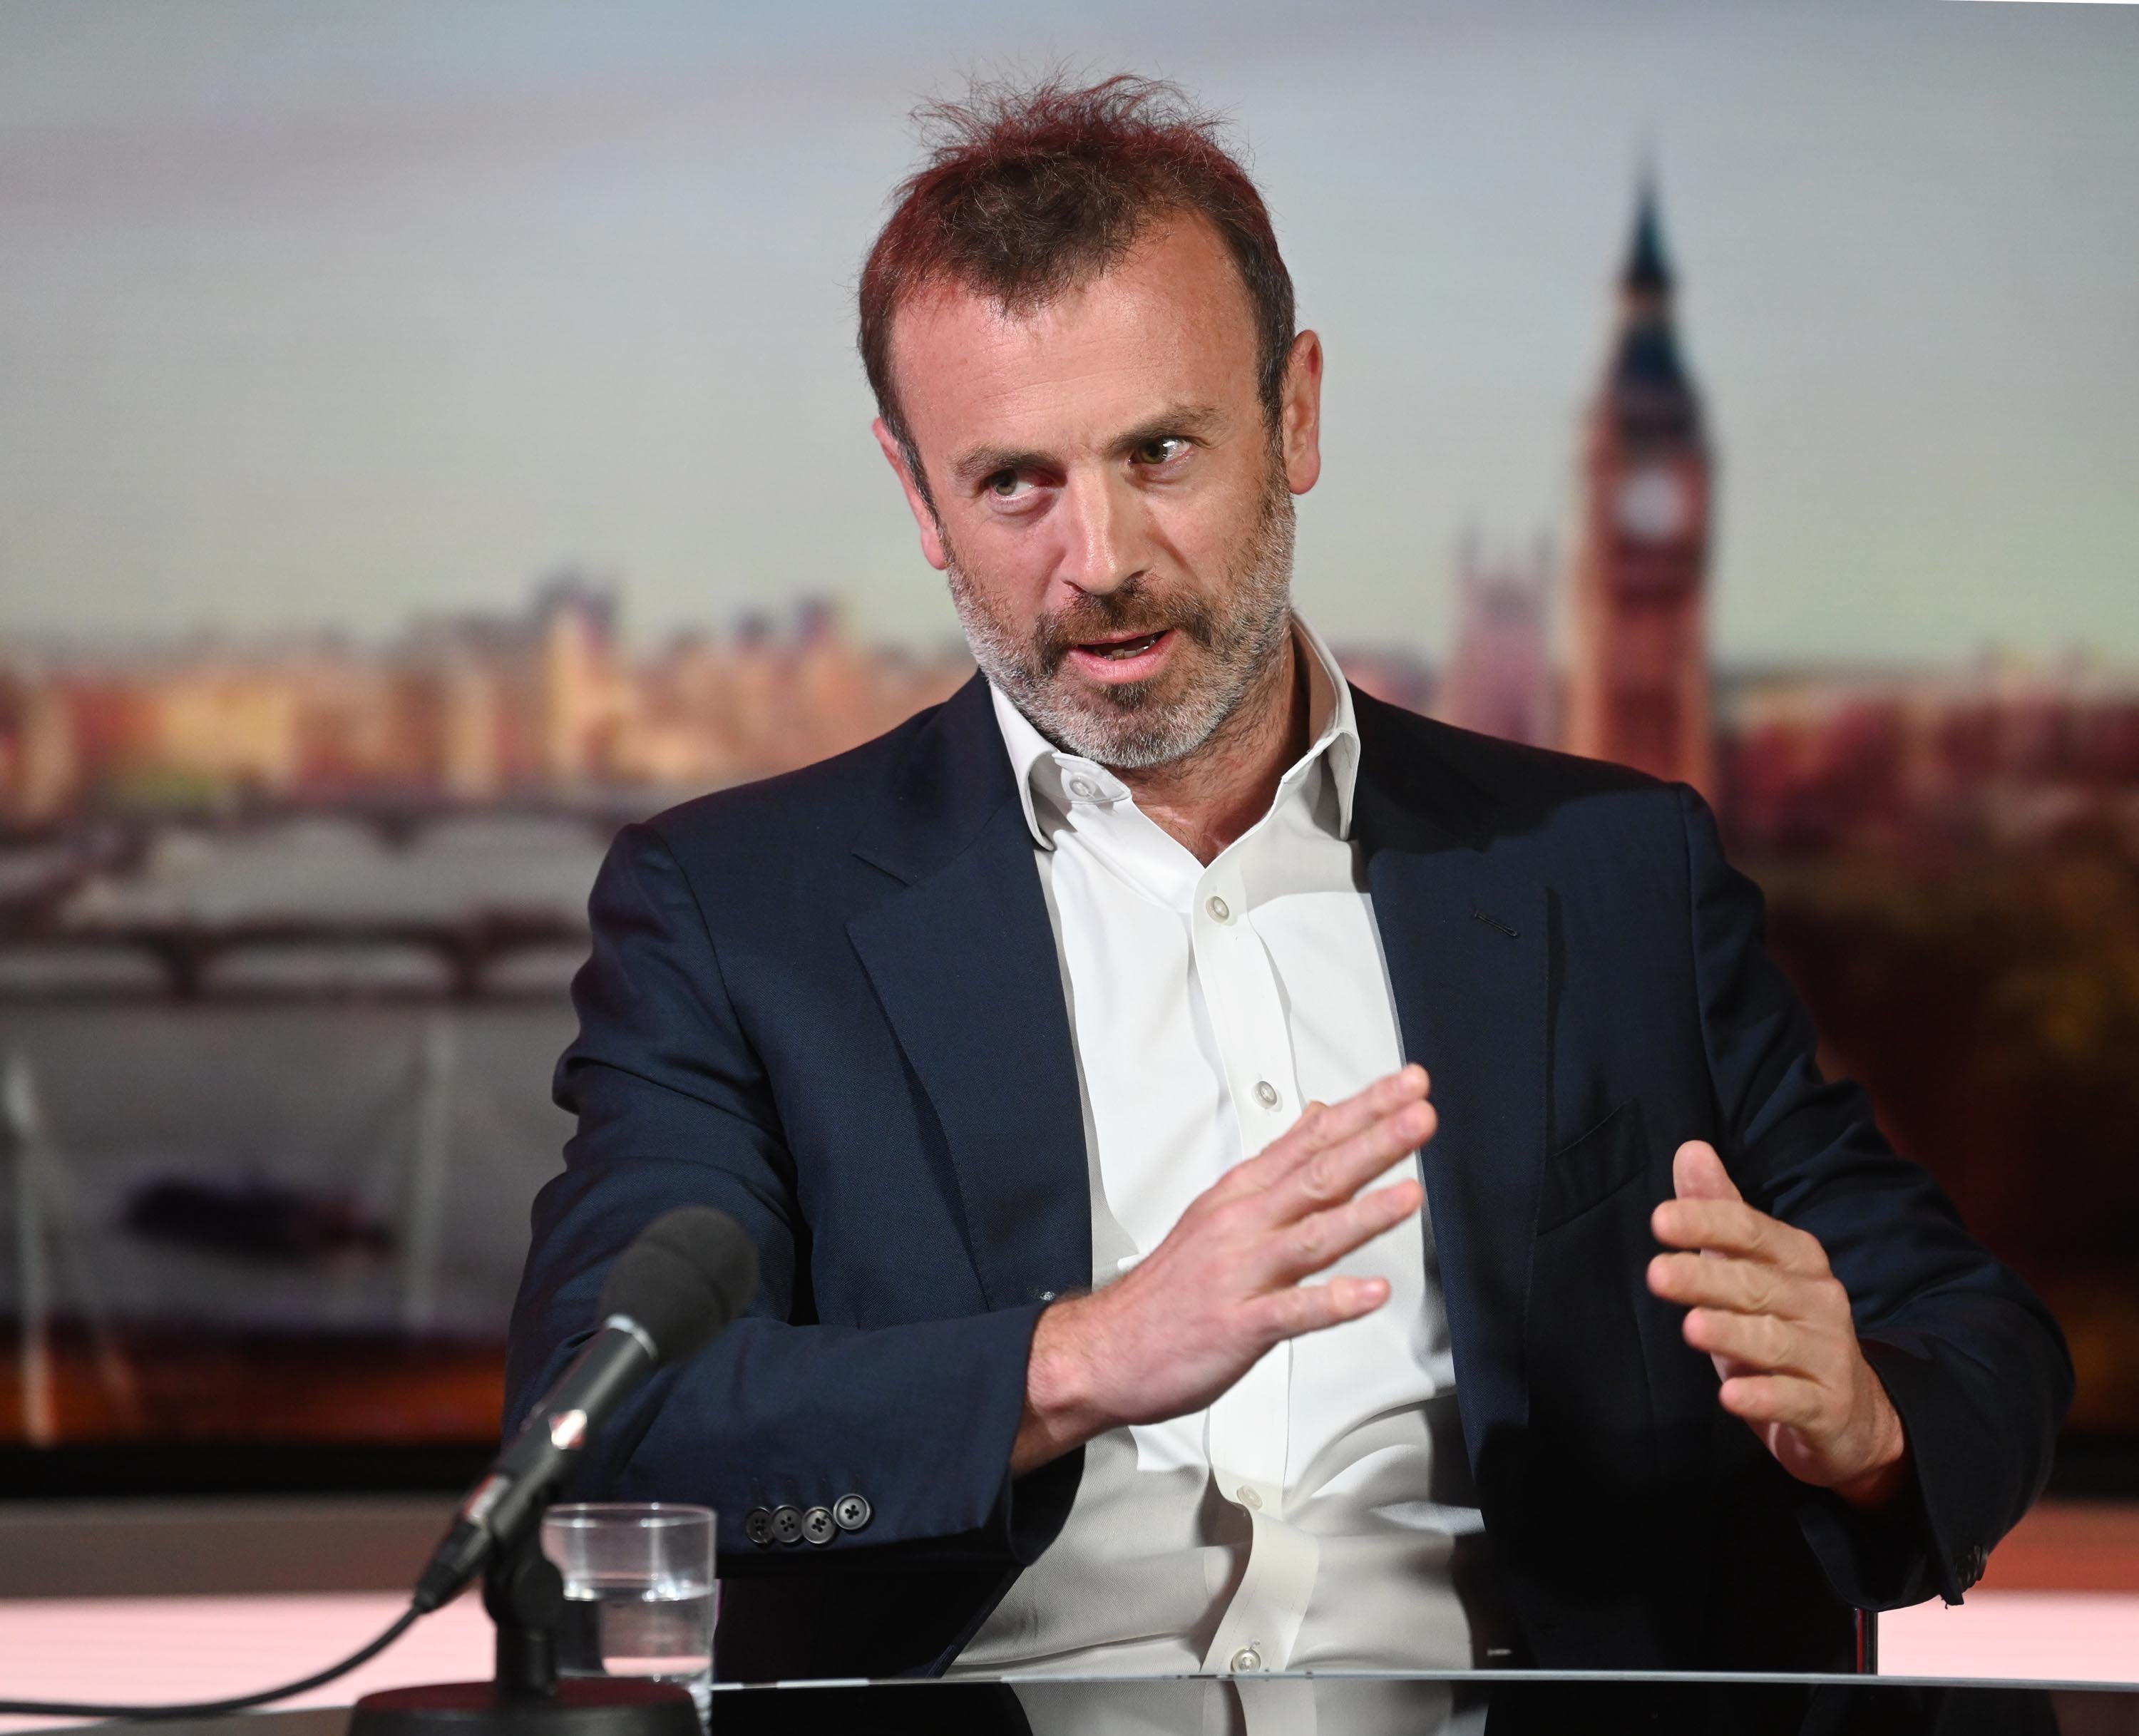 Ovo founder Stephen Fitzpatrick has outlined proposals calling on the Government to provide help with bills which would offer the most support to the poorest families (Jeff Overs/BBC/PA)